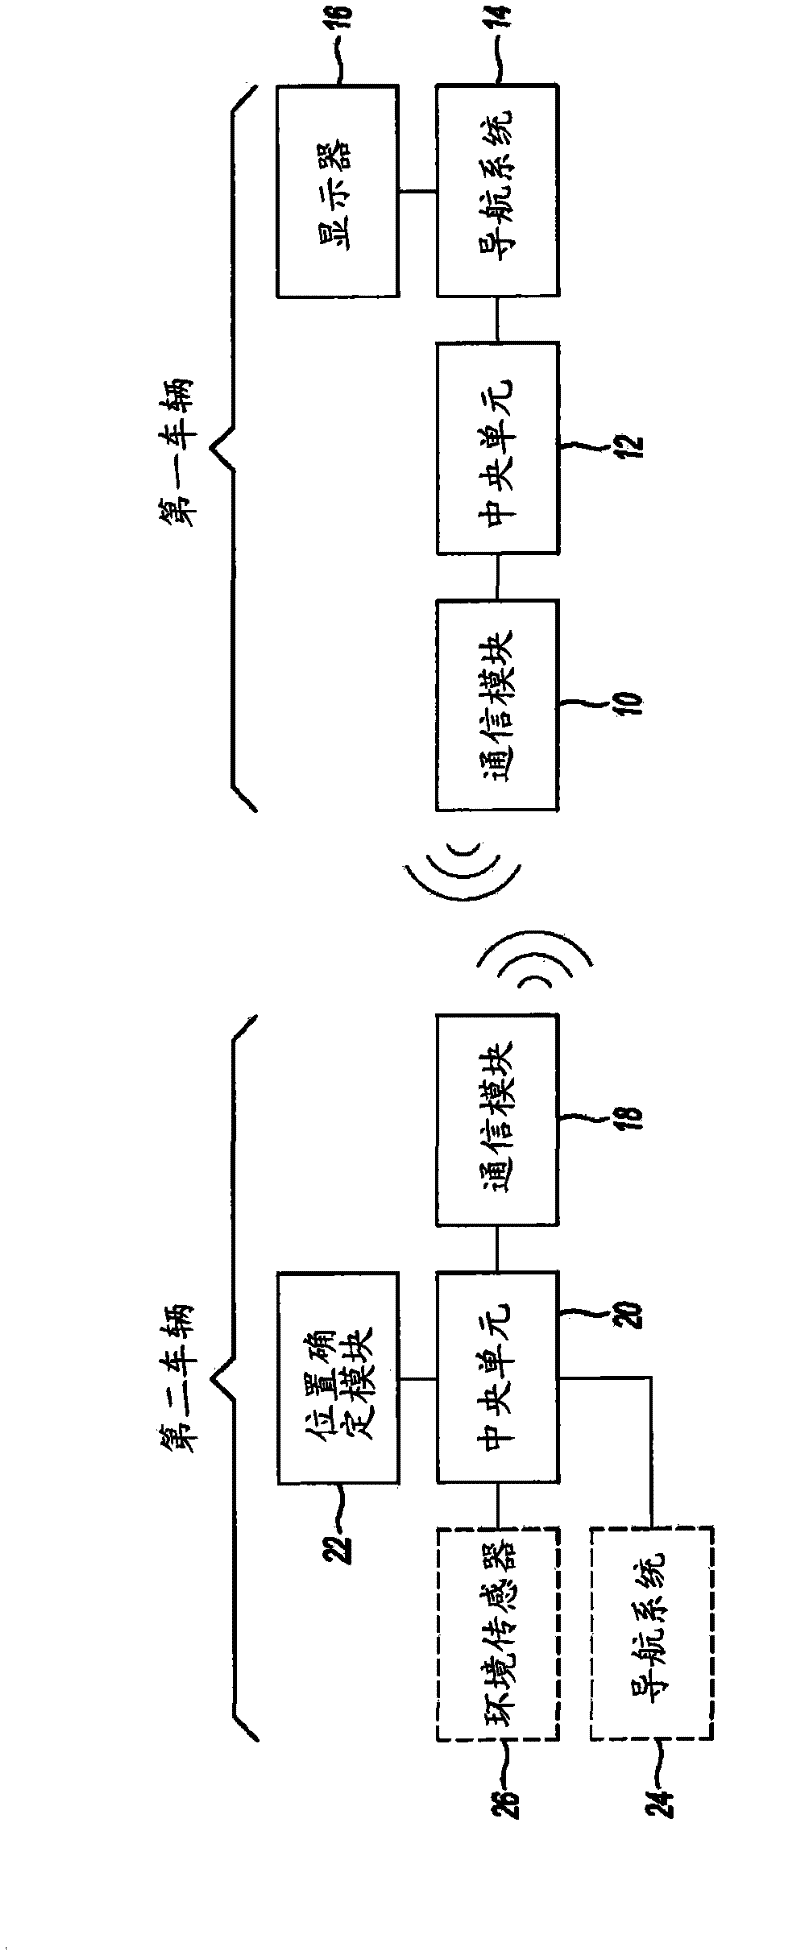 Method and device for assisting a driver in finding a parking spot